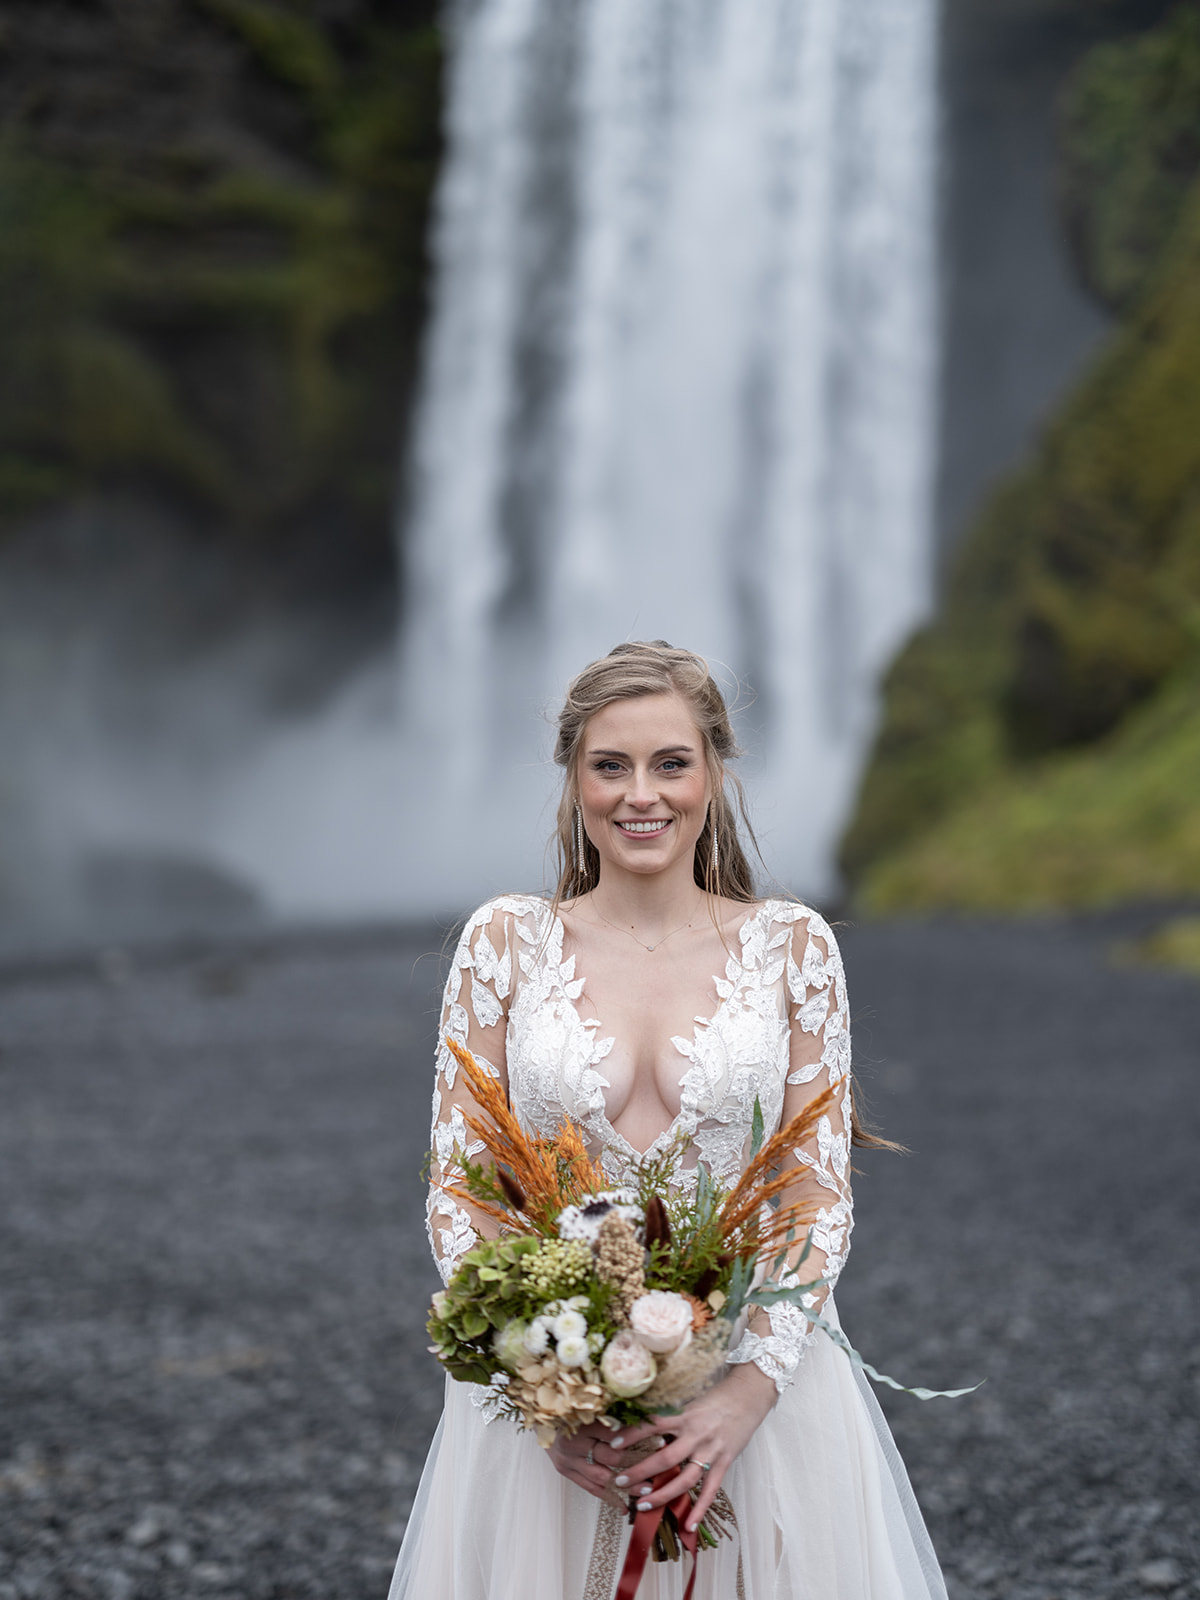 Bride standing in front of Skogafoss on her elopement day